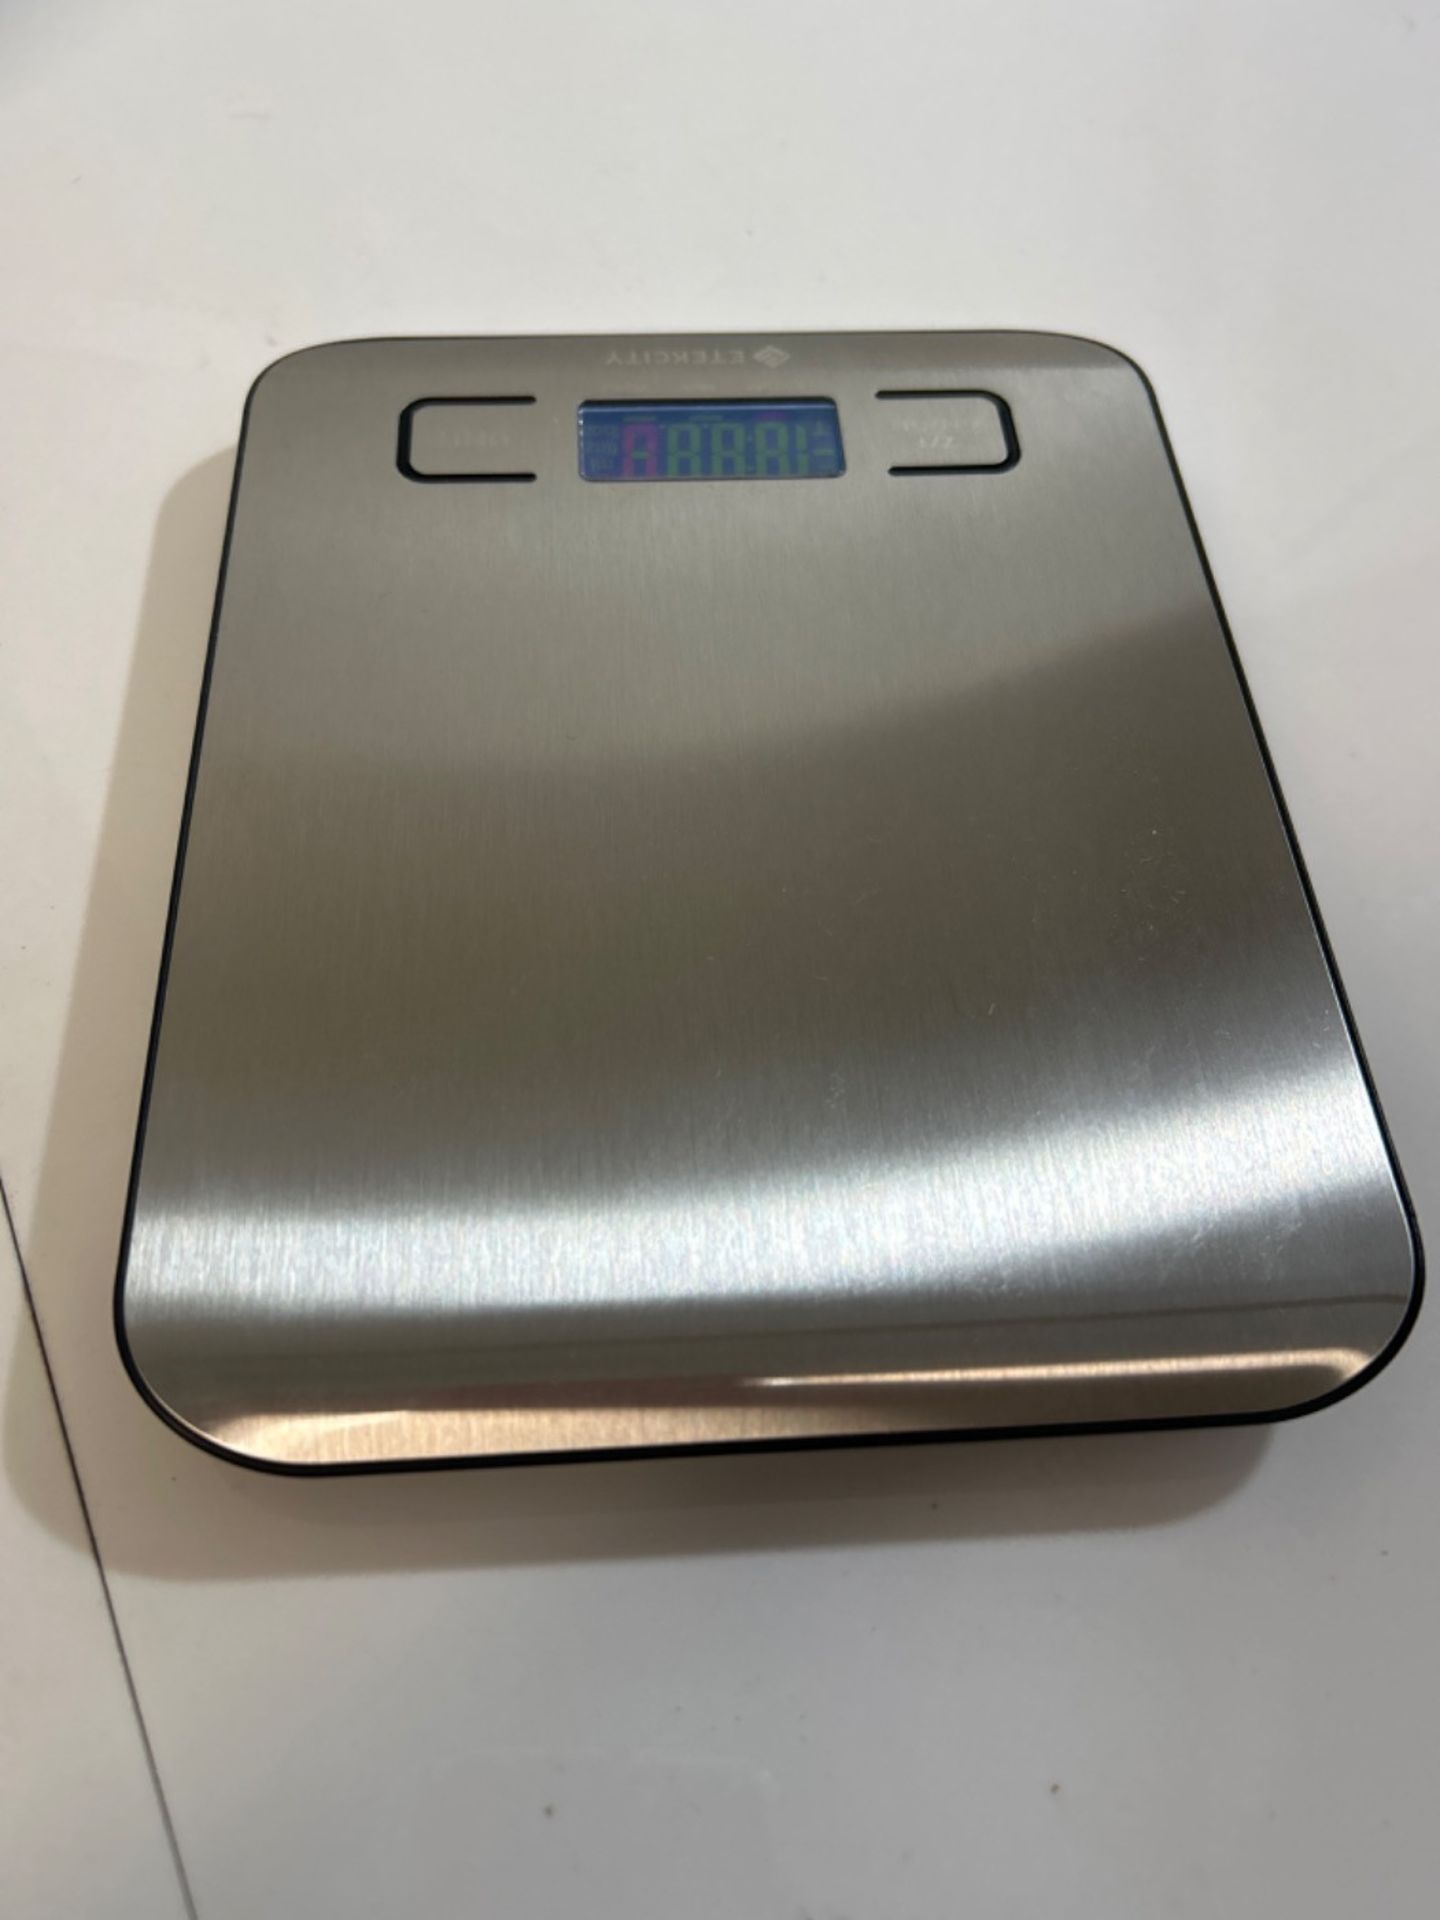 Etekcity Digital Kitchen Scales, Premium Stainless Steel Food Scales, Professional Food Weighing Sc - Image 2 of 3